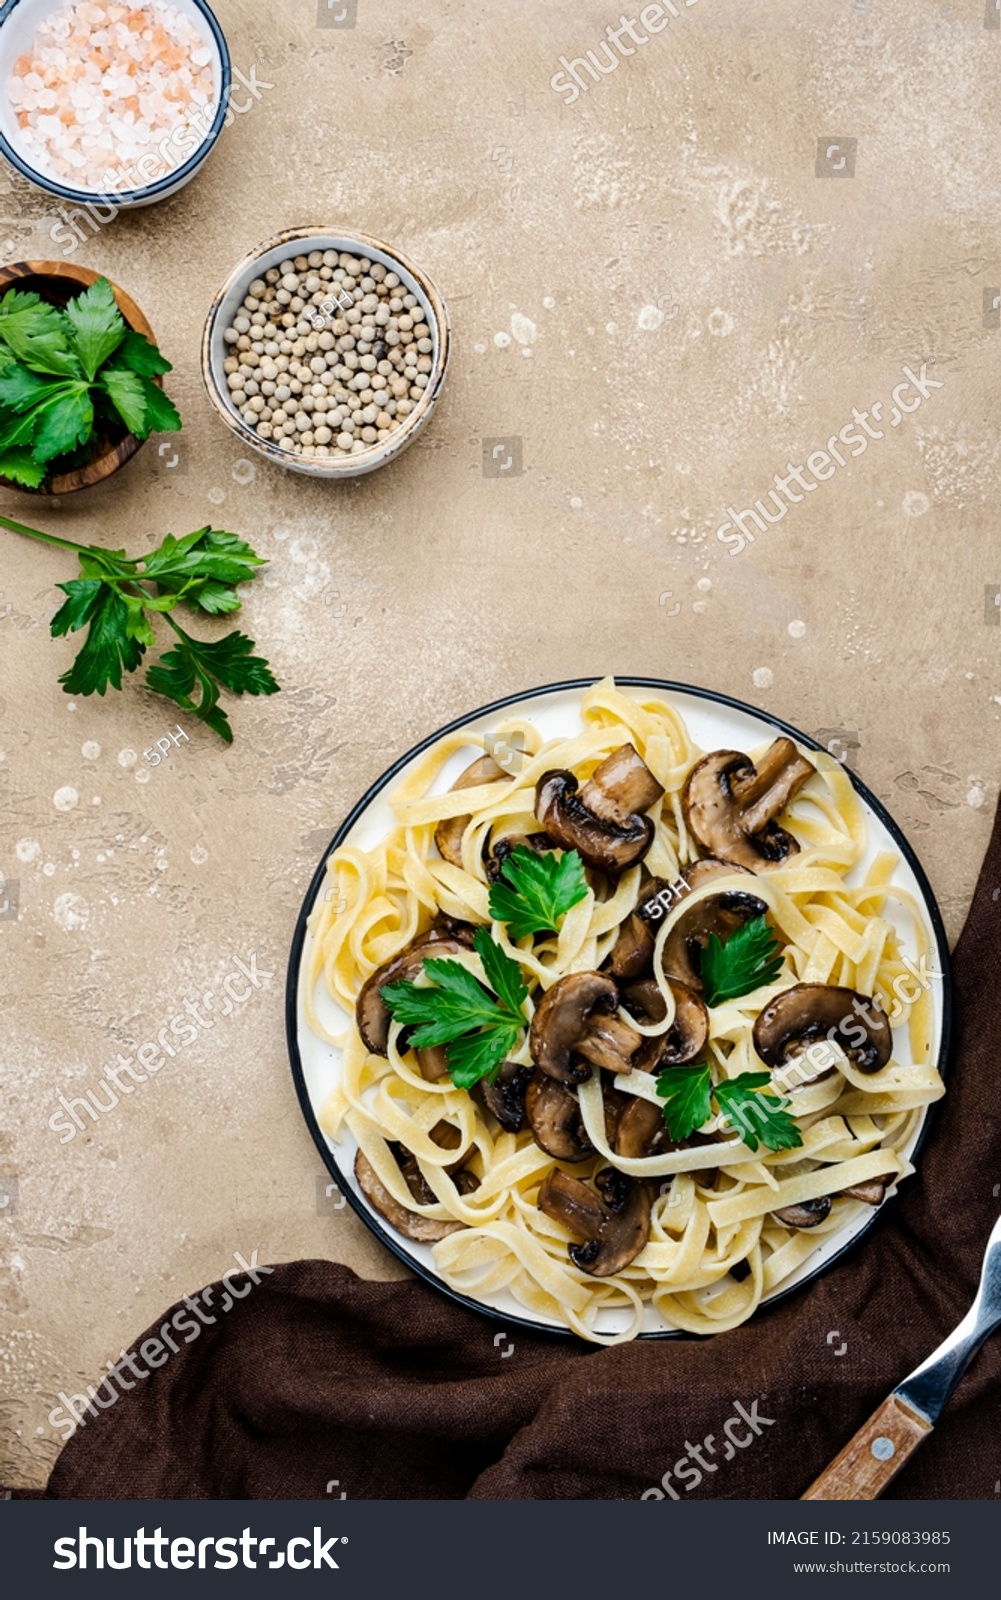 Cooked pasta with mushrooms with parsley on plate on beige stone kitchen table background, top view. Vegan cooking and eating, italian cuisine recipe #2159083985